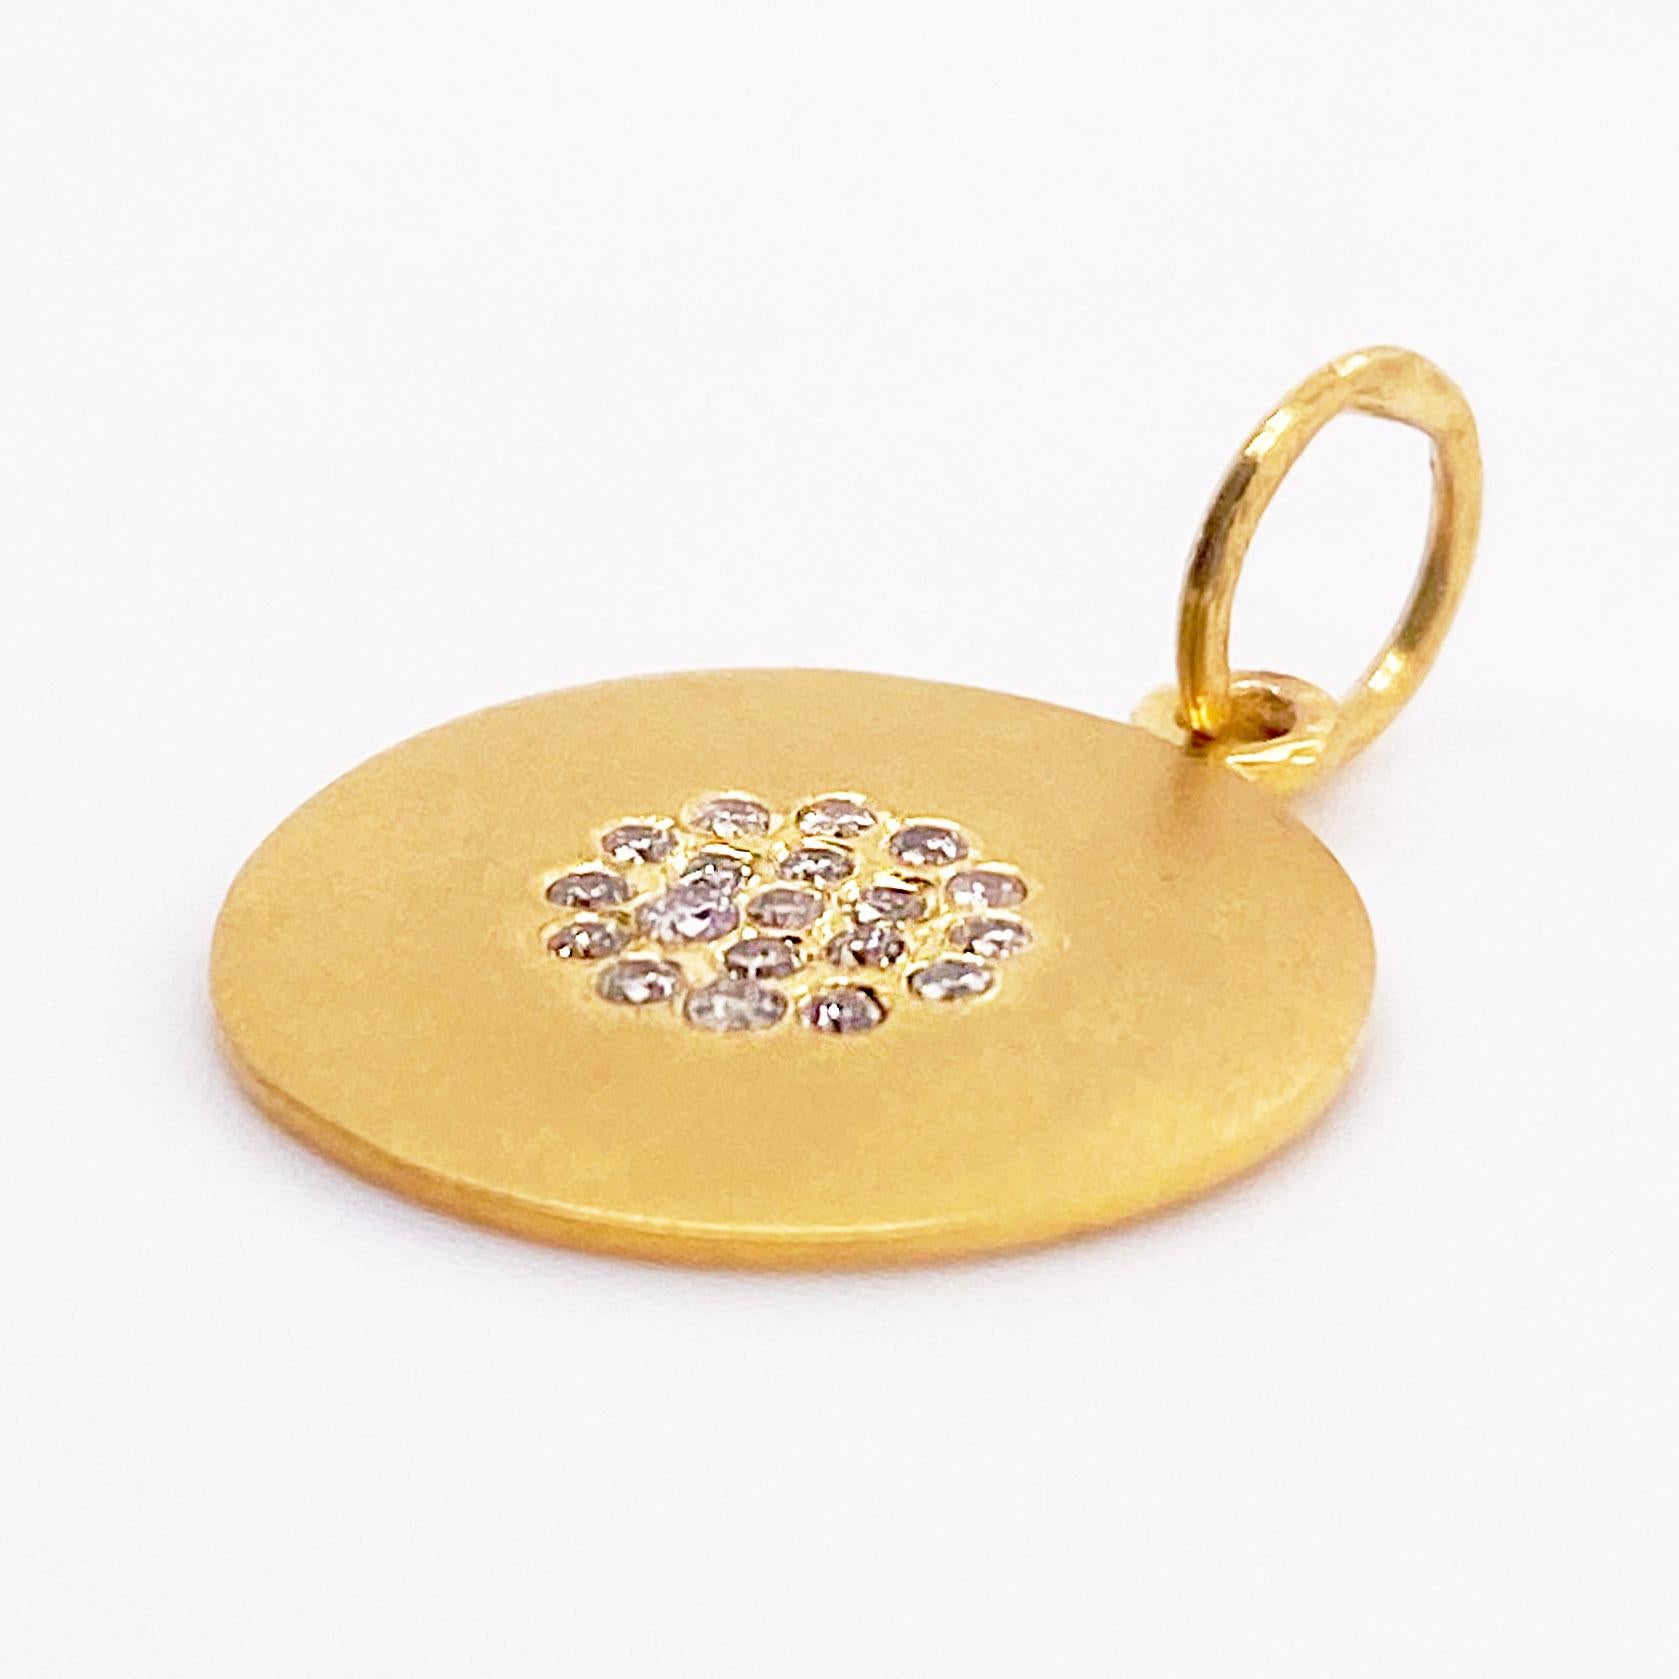 The details for this gorgeous charm are listed below:
Metal Quality: 14K Yellow Gold
Charm Type: Diamond Disc
Charm Measurements: 15 millimeters
Diamond Number: 19
Diamond Shape: Round Brilliant
Diamond Clarity: VS2 (excellent, eye clean)
Diamond